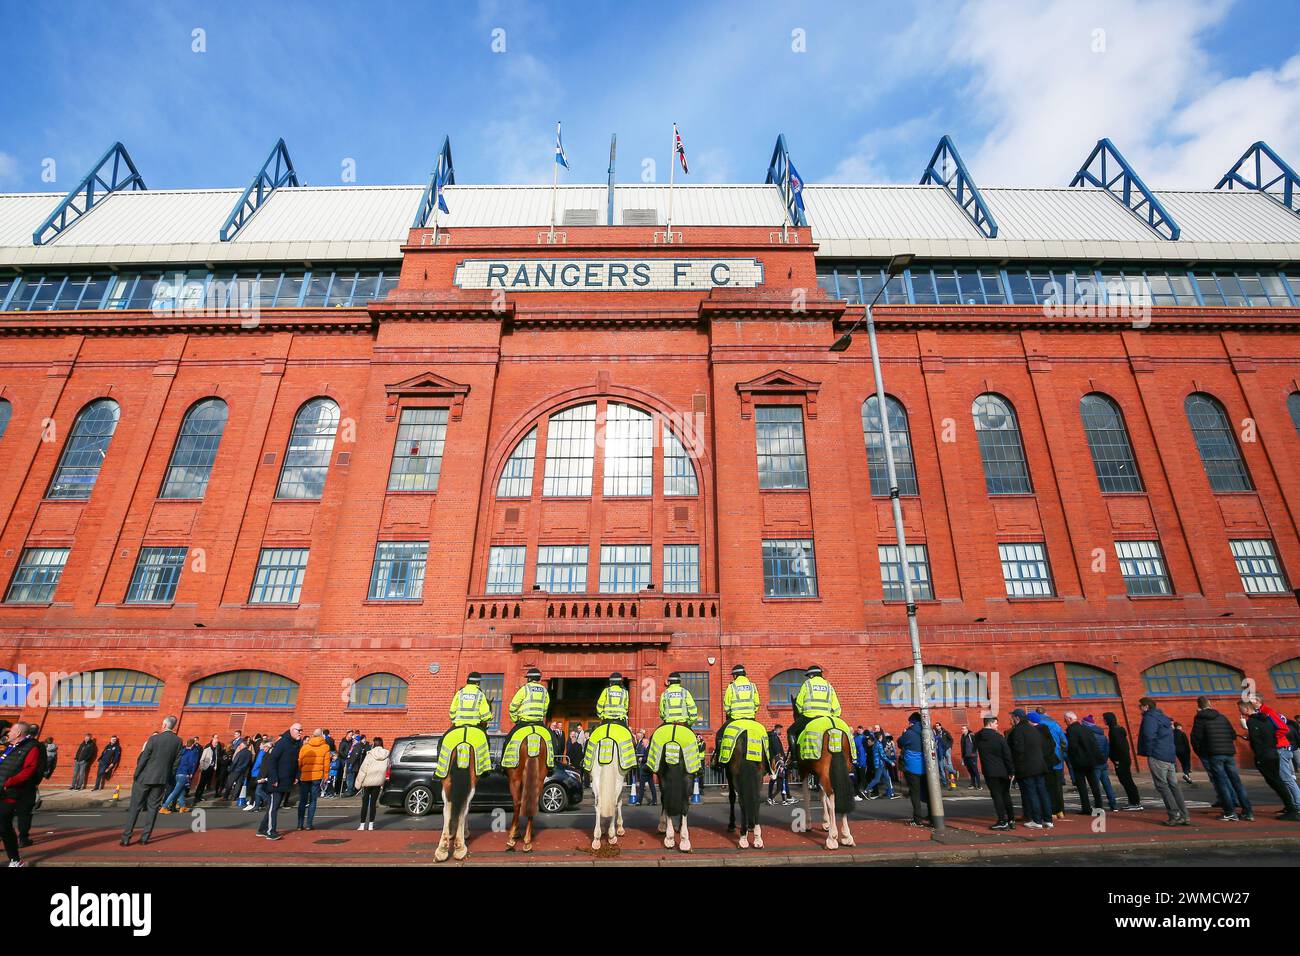 Police horses and mounted police giving security in Edminston Drive entrance to Ibrox Stadium, Rangers Football Club home ground, Glasgow, Scotland, U Stock Photo